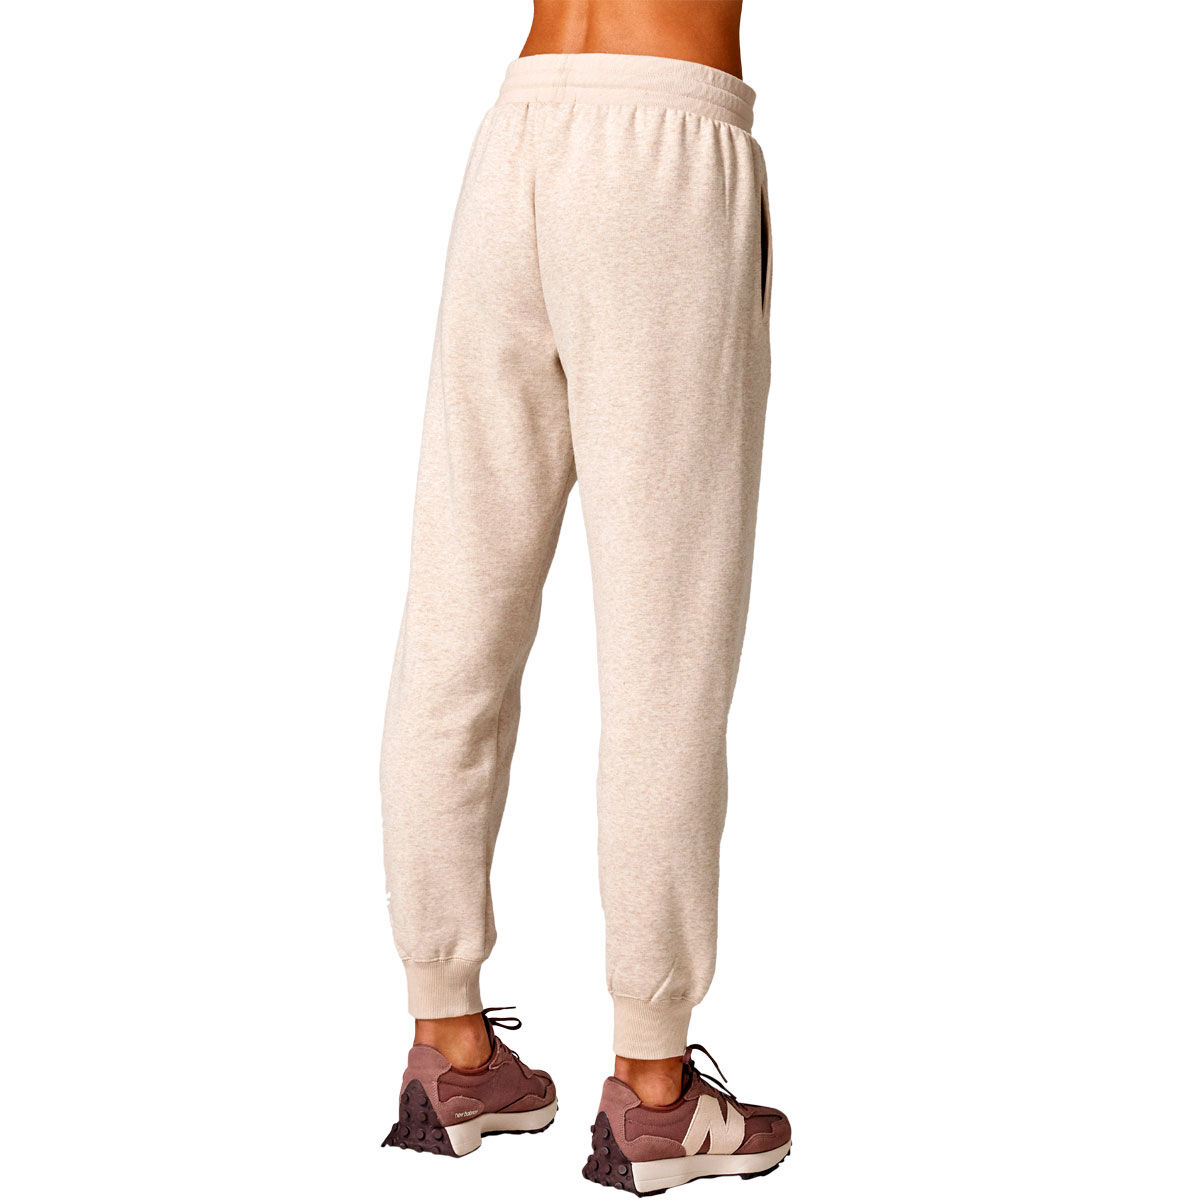 Running Bare Womens Ad Waisted Legacy Sweat Pants Oatmeal XL